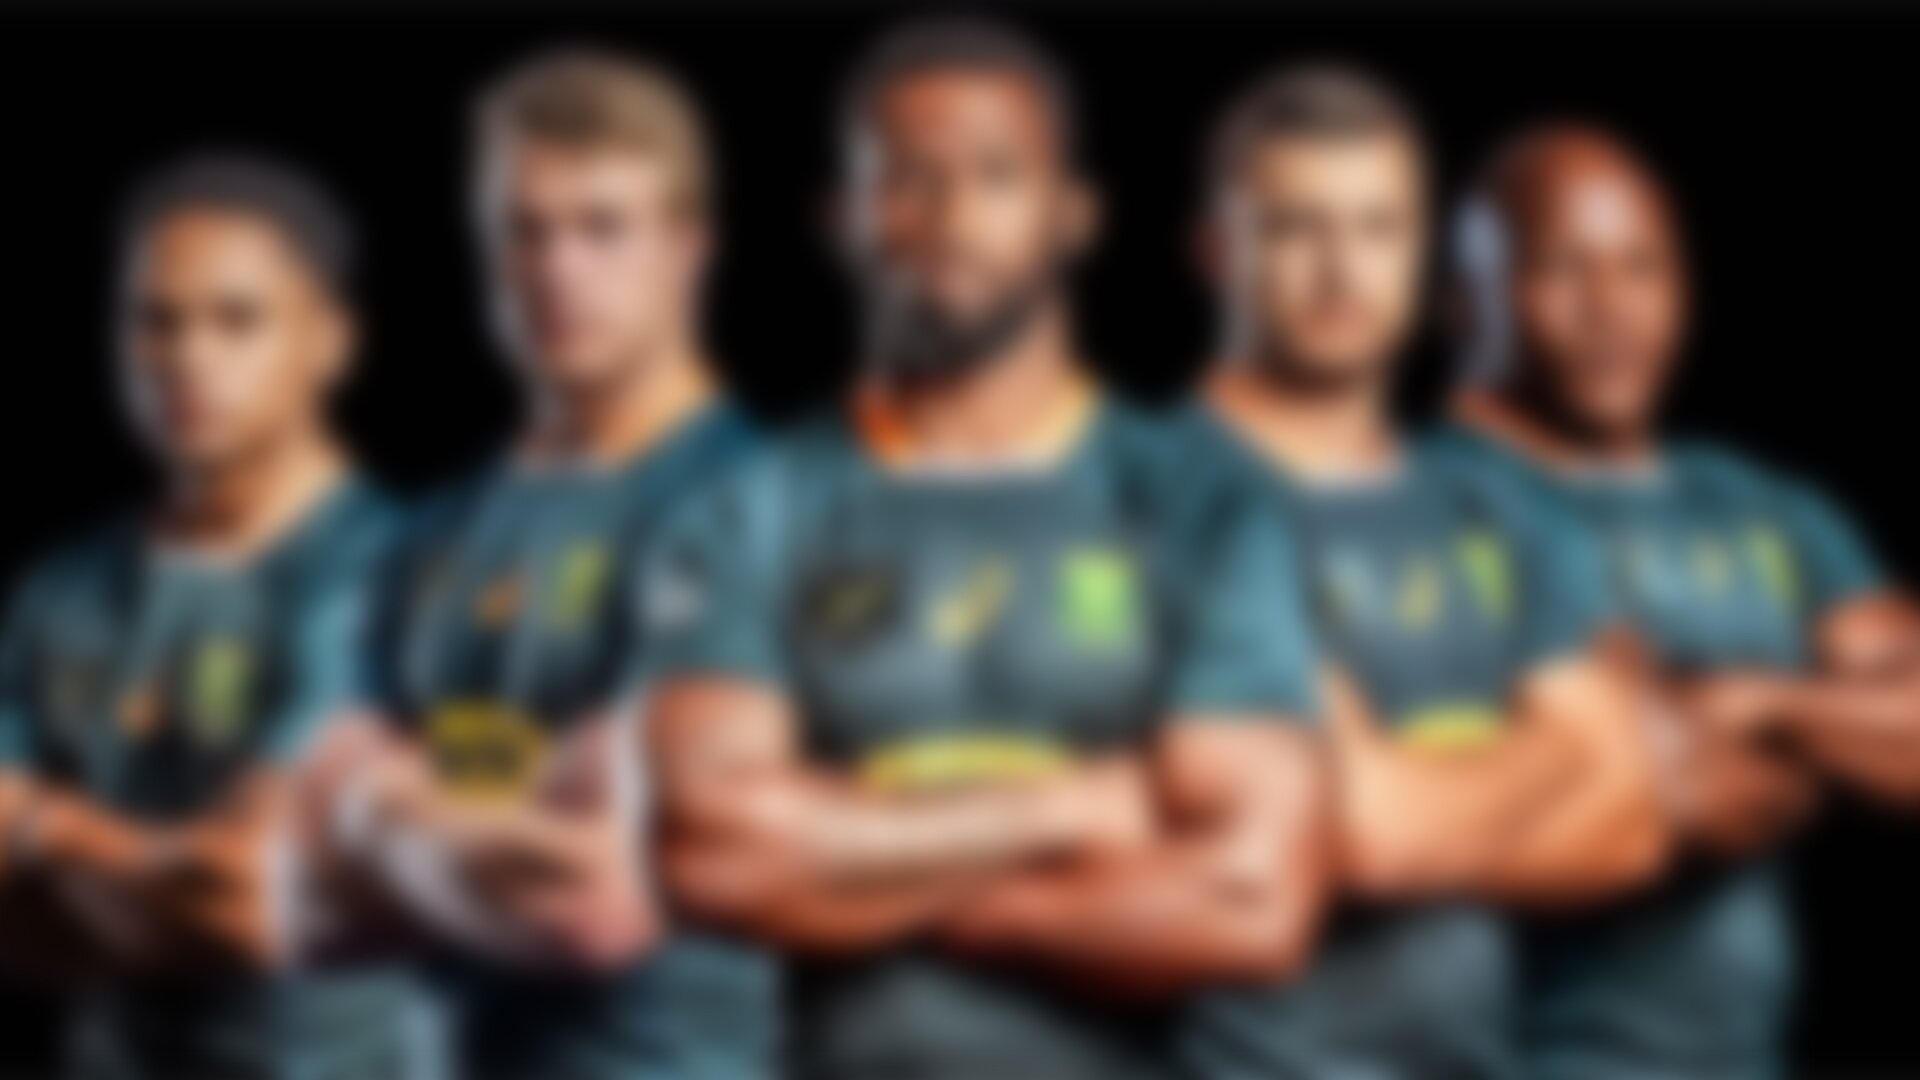 Springboks unveil new jersey to be worn against the Lions and it's sending the internet into overdrive